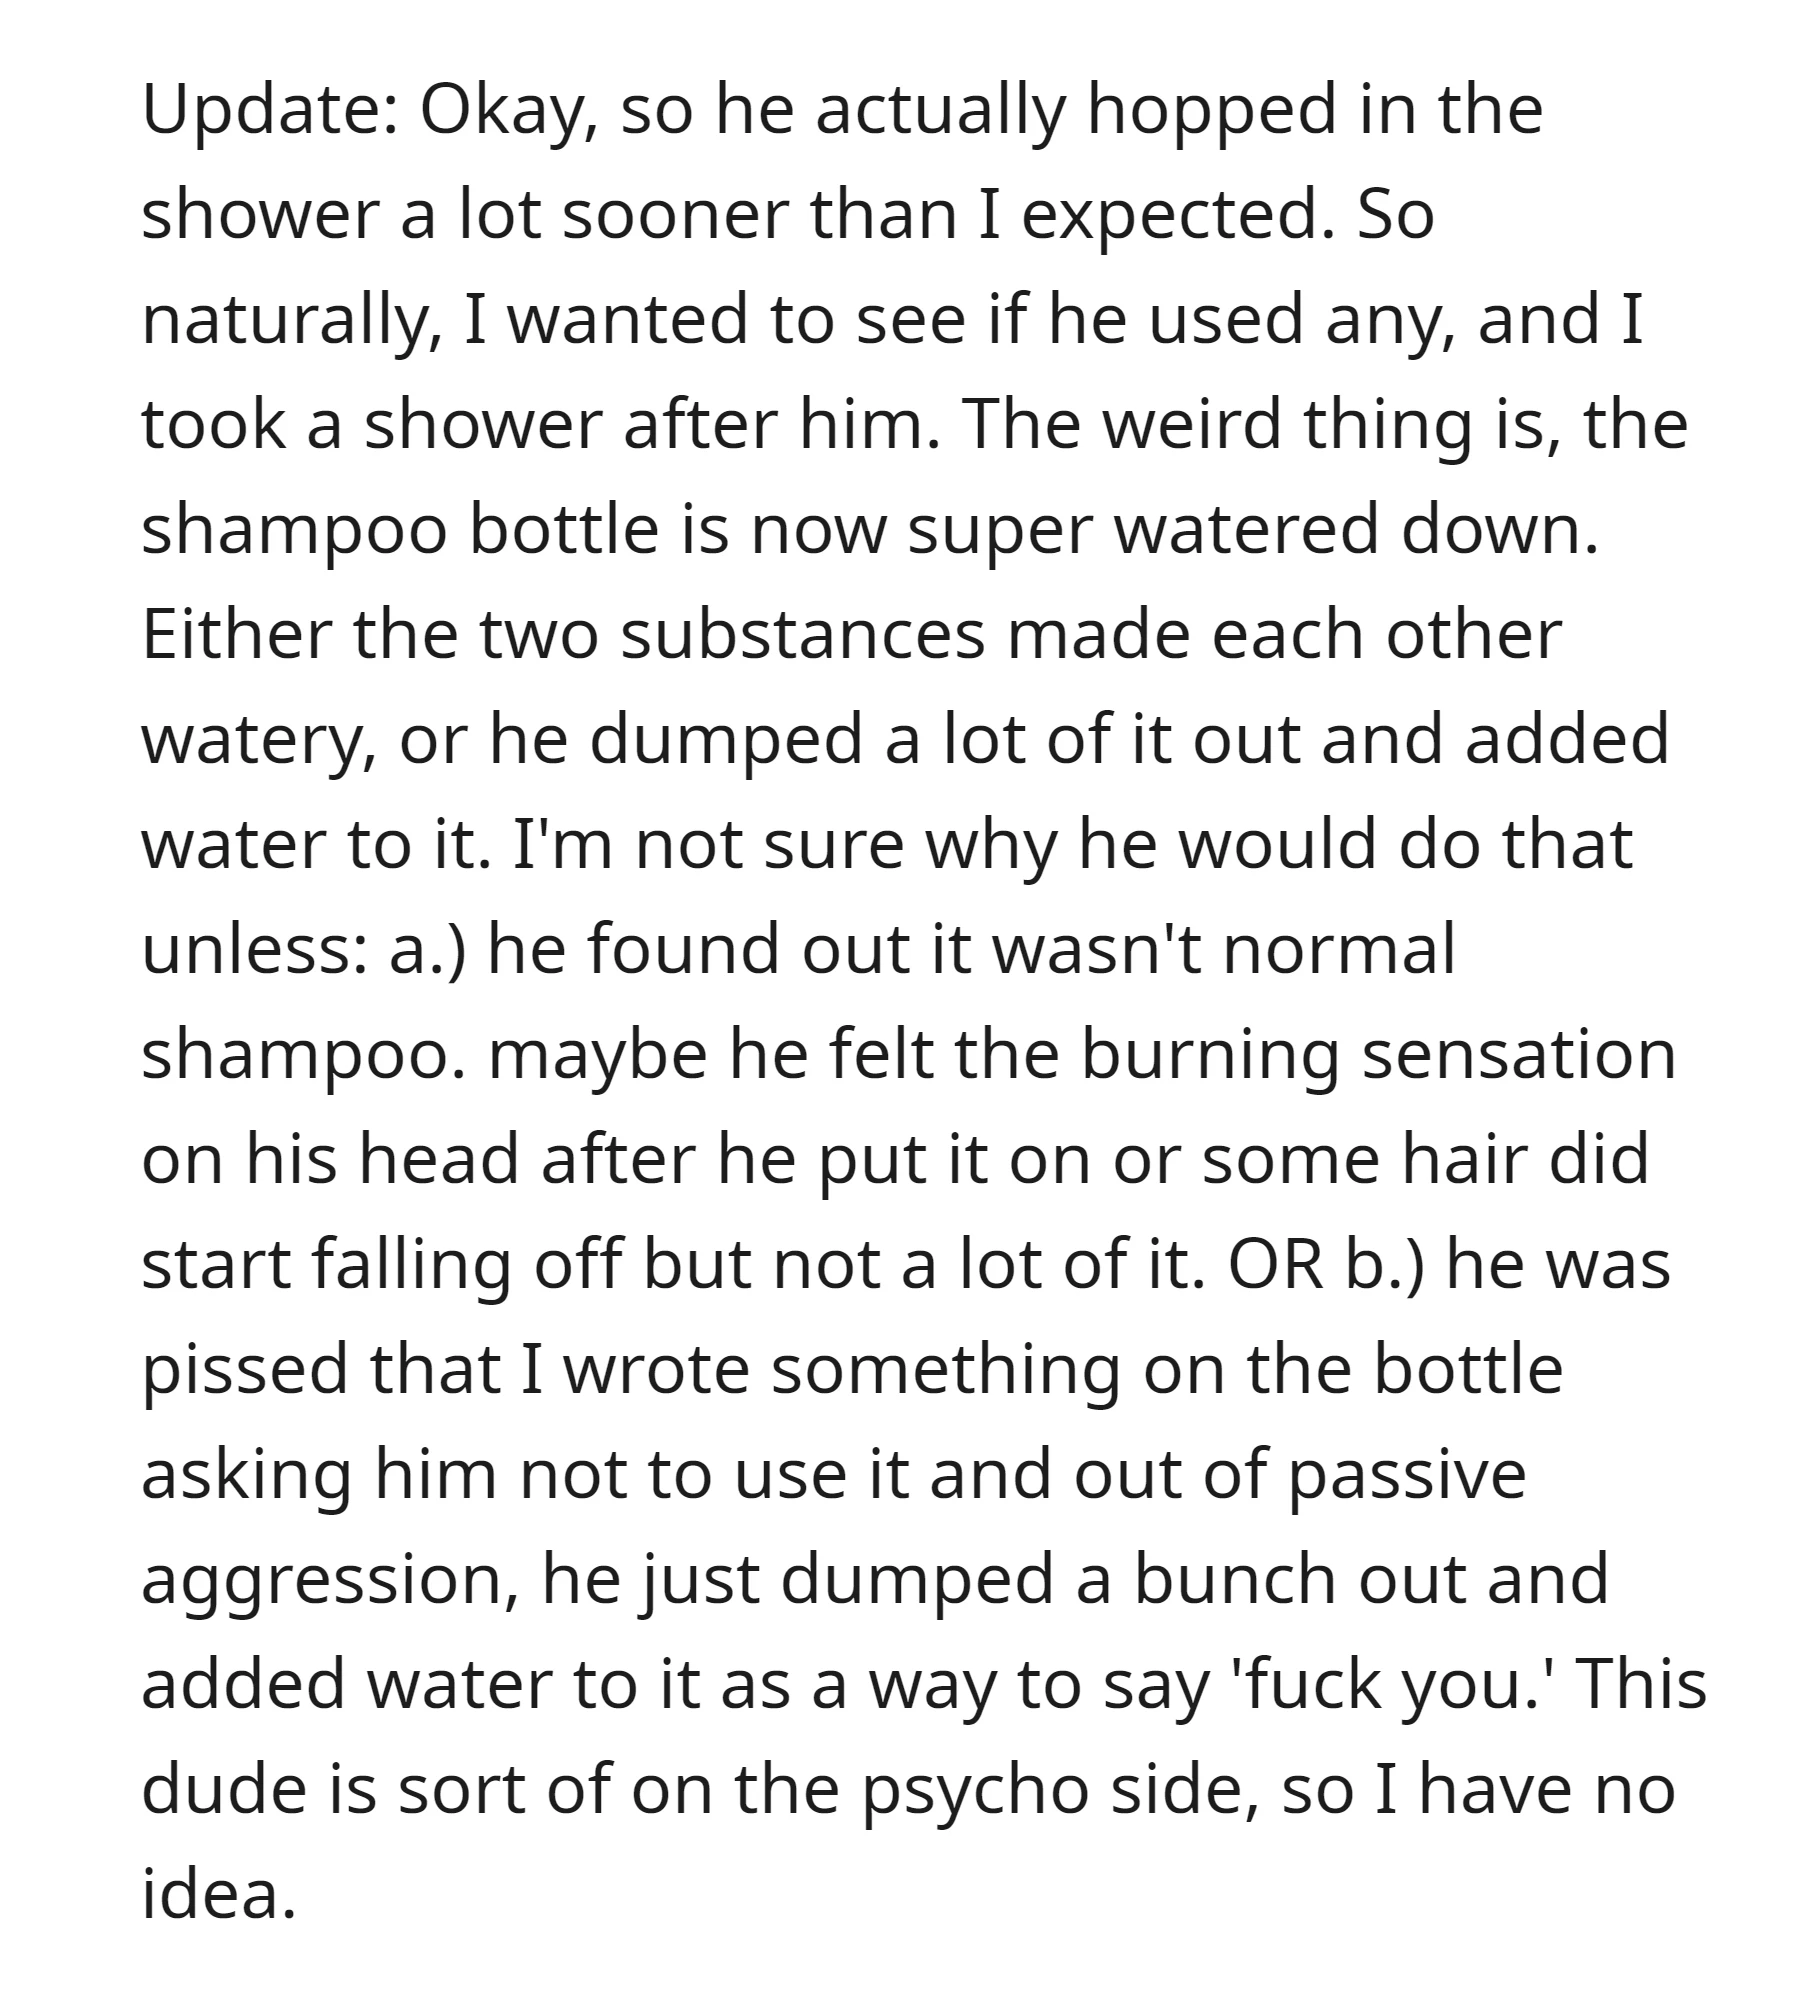 OP found that the bottle watered down after his roommate's shower